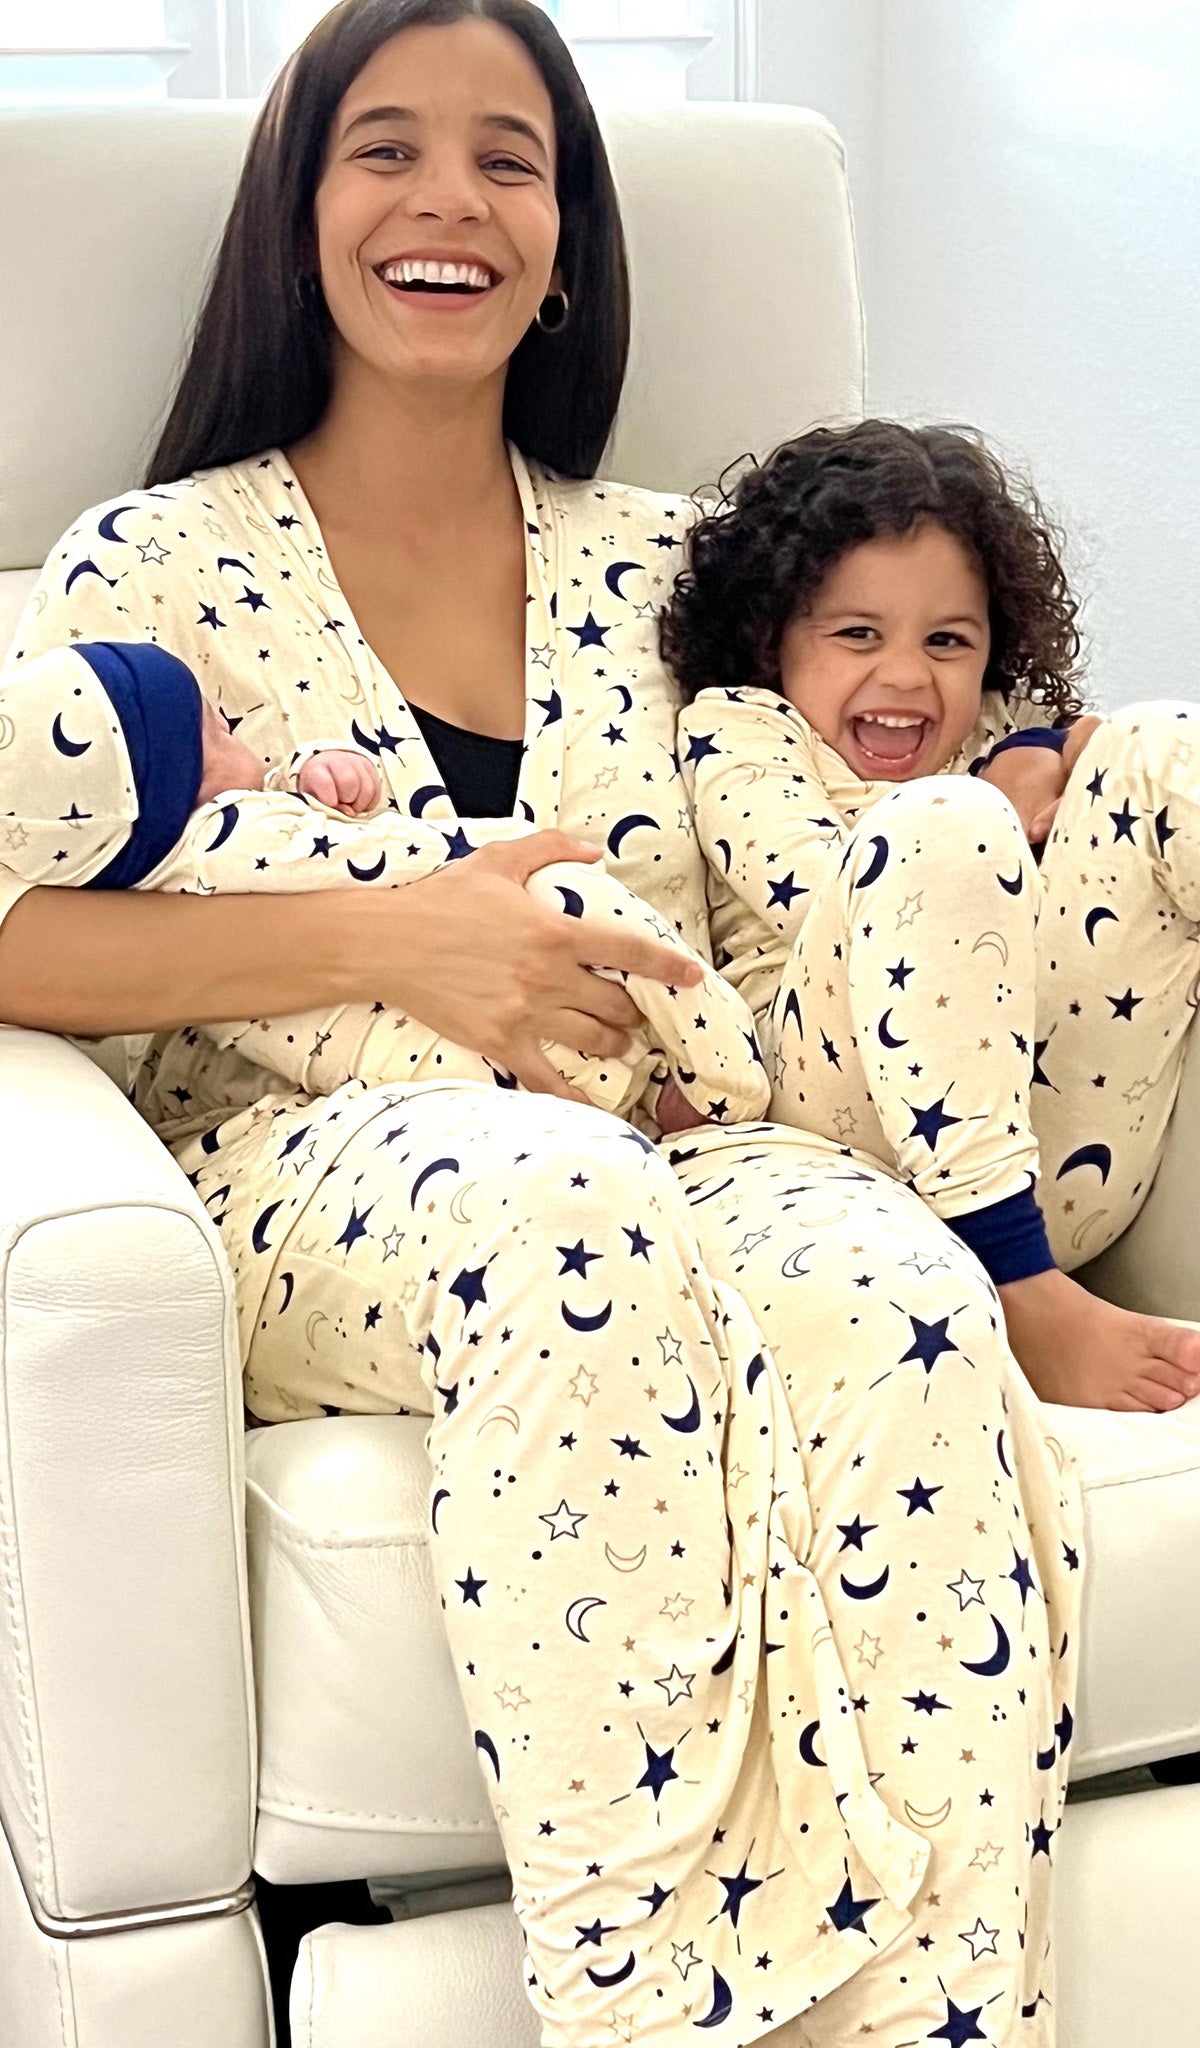 Emerson Kids 2 Piece Pant PJ - Twinkle worn by little boy sitting on chair next to his mom who his holding his baby brother.